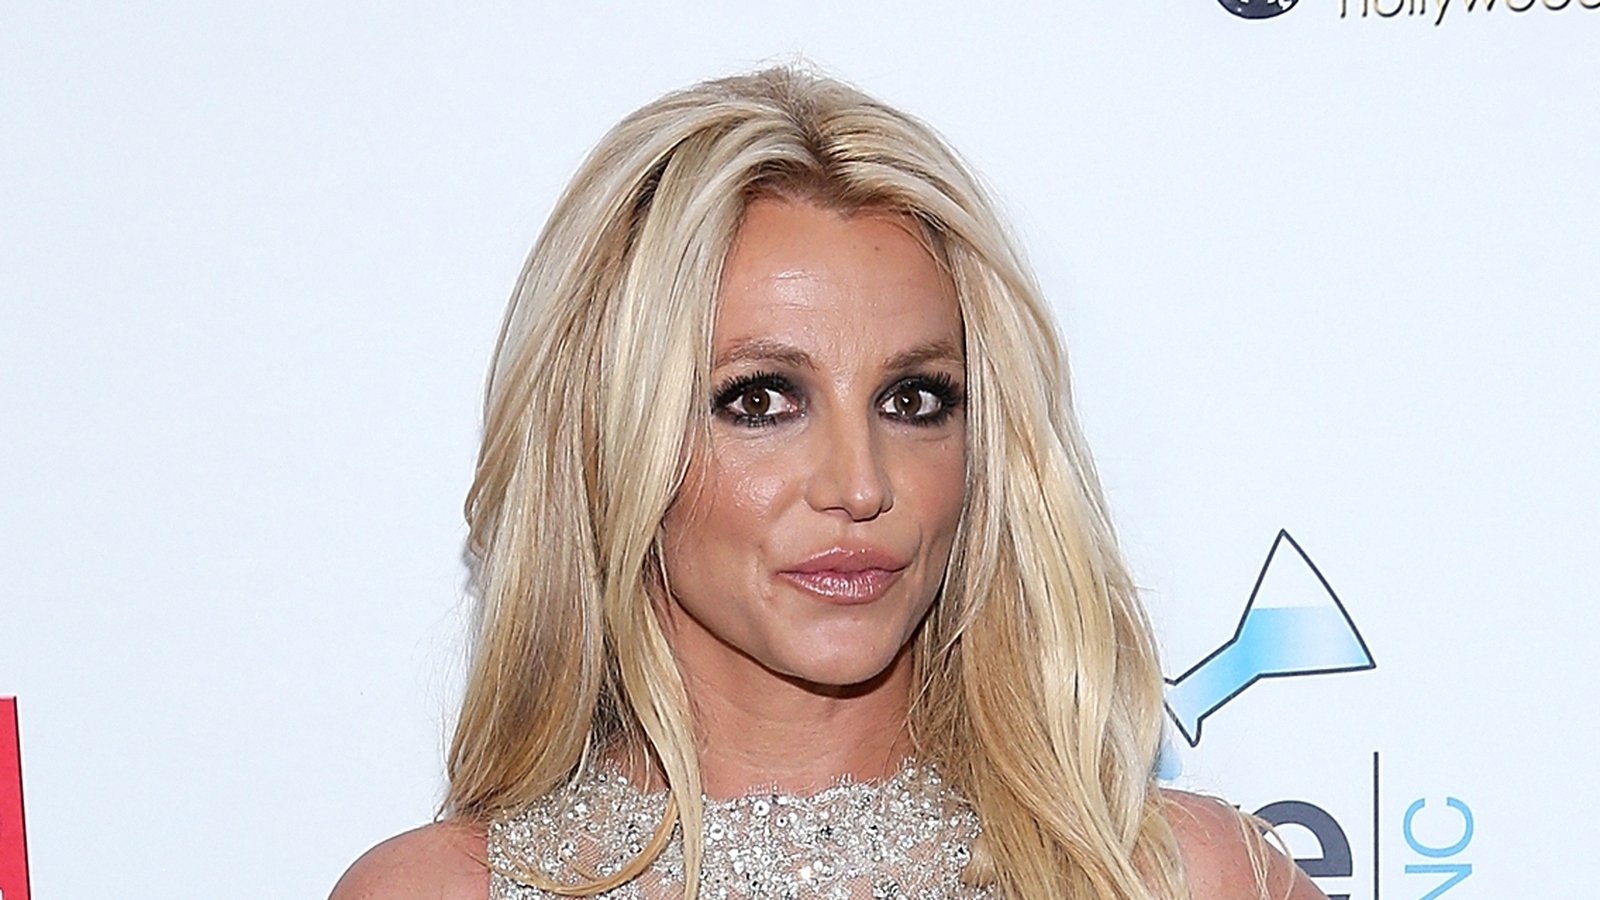 Popstar Britney Spears has spoken out against her conservatorship at a hearing in Los Angeles